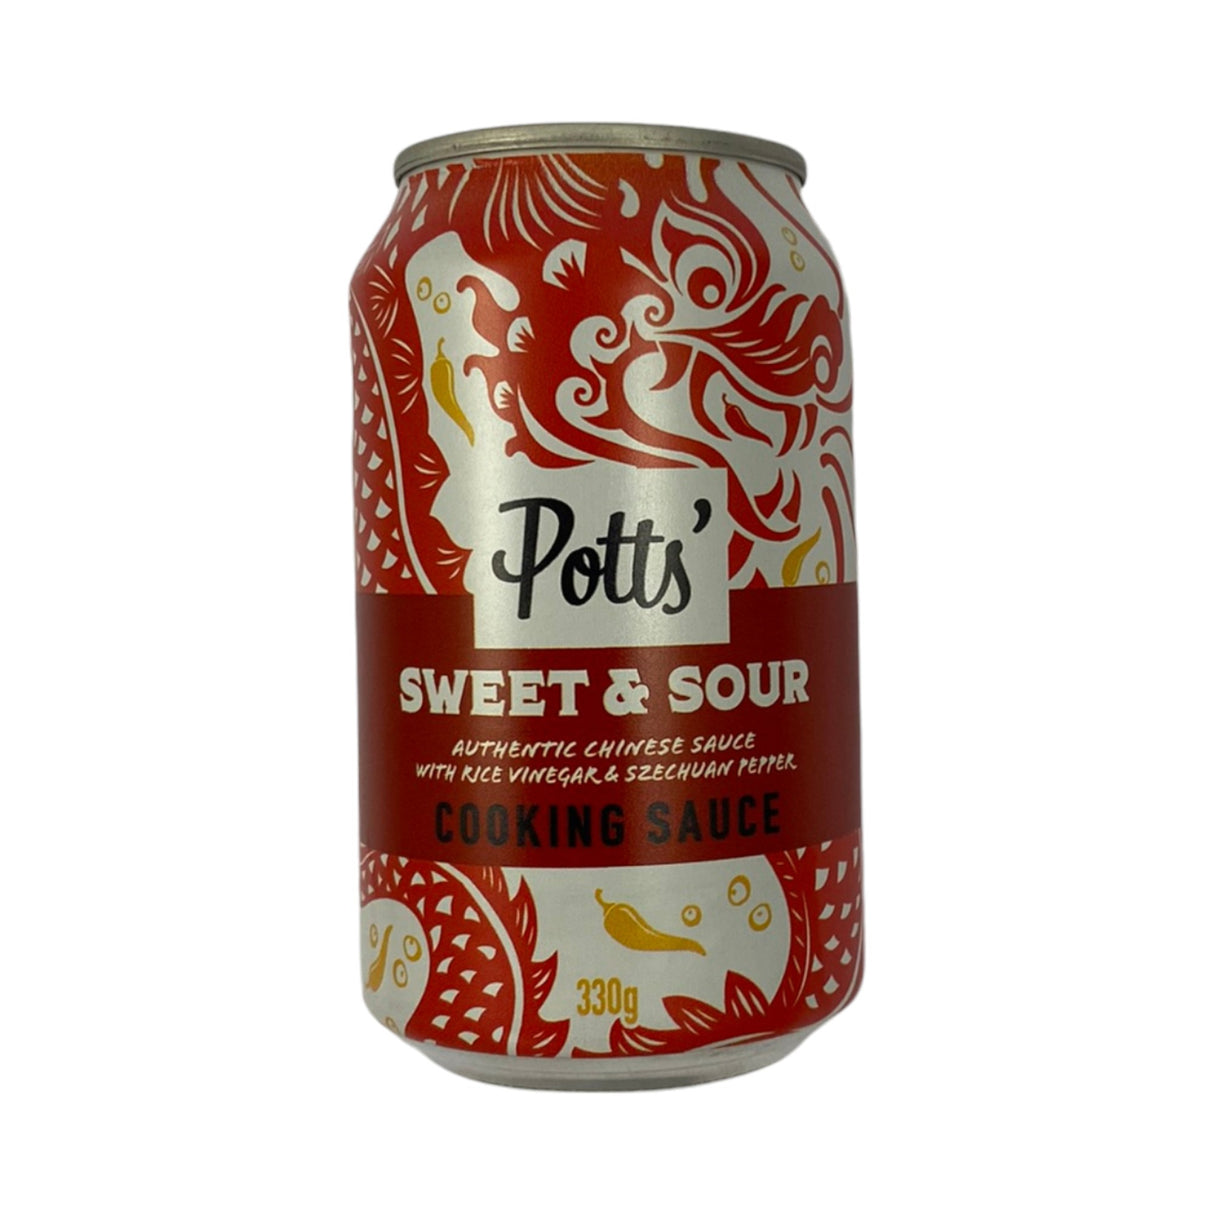 Potts - Sweet and Sour Cooking Sauce Can 330g